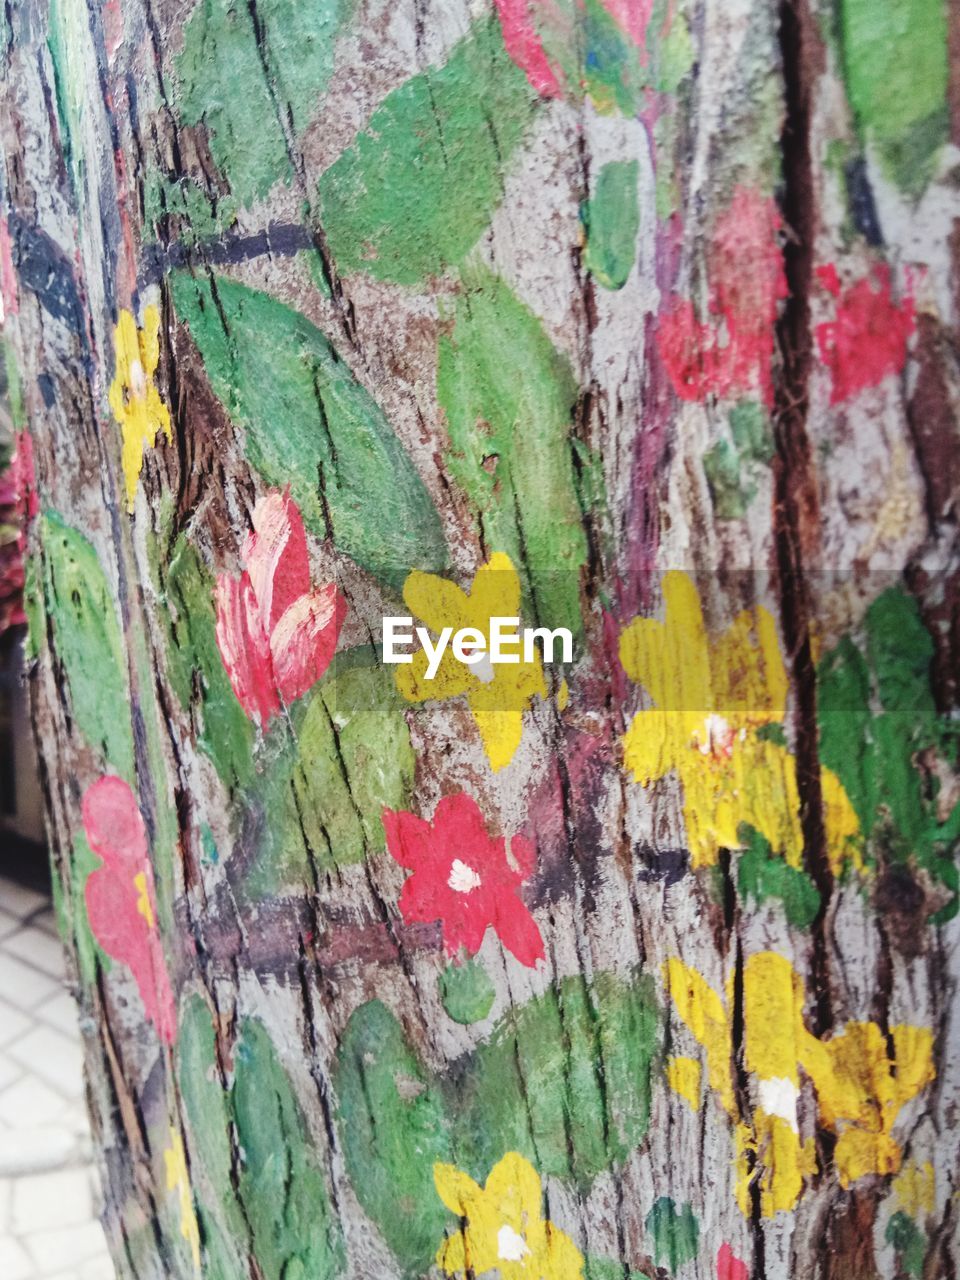 multi colored, no people, leaf, yellow, flower, wall - building feature, close-up, day, art, green, pattern, creativity, full frame, painting, textured, tree, backgrounds, paint, outdoors, wood, autumn, graffiti, tree trunk, plant, built structure, weathered, trunk, architecture, wall